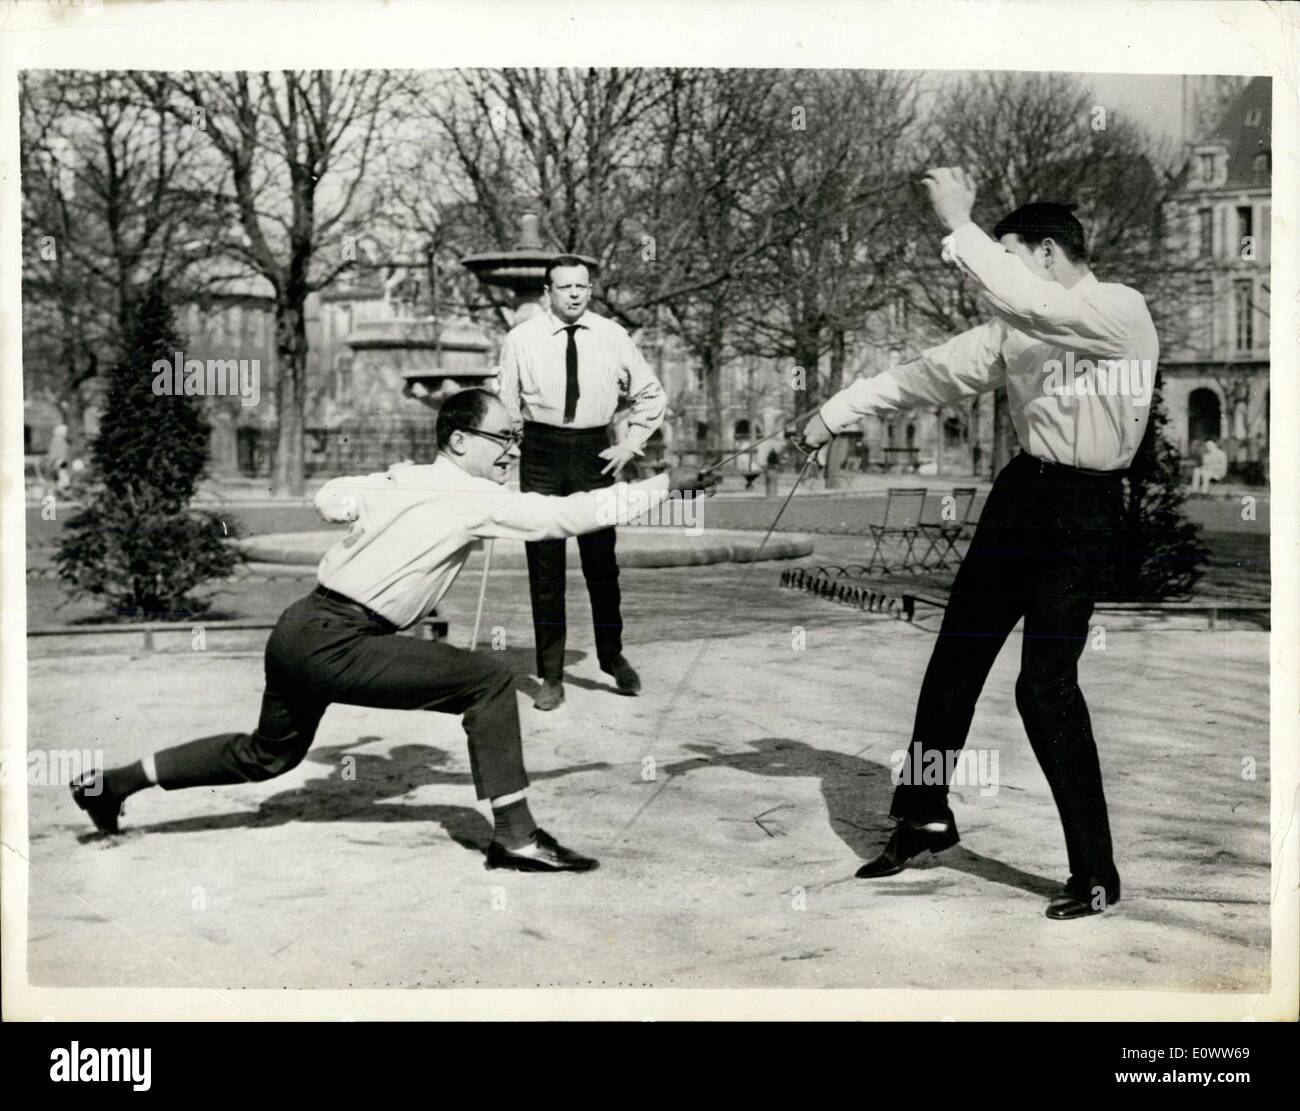 Mar. 11, 1964 - Journalists Duel - Over a Book: In Paris this morning, two Journalists, Monsieur Eskanazy and Monsieur Mordacq fought a duel in the place des Vosges. The had disagreed over a book written about Leon Daudet, a French fascist of the 1930's. The duel came to an end when Monsieur Moedacq was wounded on the right side by his opponents infantry sword. Picture Shows: The Scene during the duel, M. Eskanazy is on the left, M. Mordacq is right, watched by the Master at Arms. Stock Photo